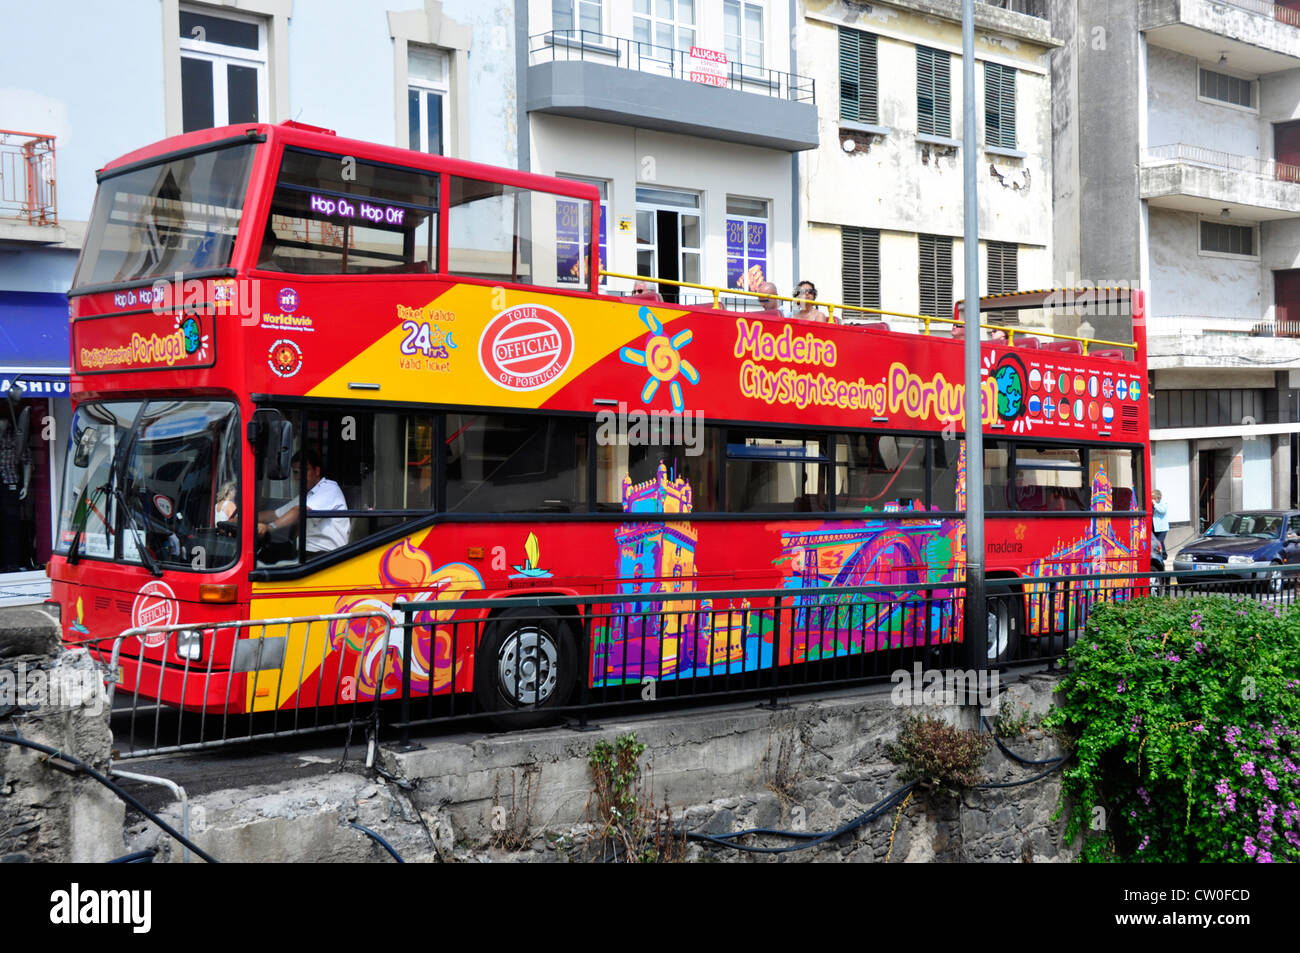 Portugal - Madeira island - Funchal town - distinctive red open top bus offering local tours - similar to buses seen in London Stock Photo